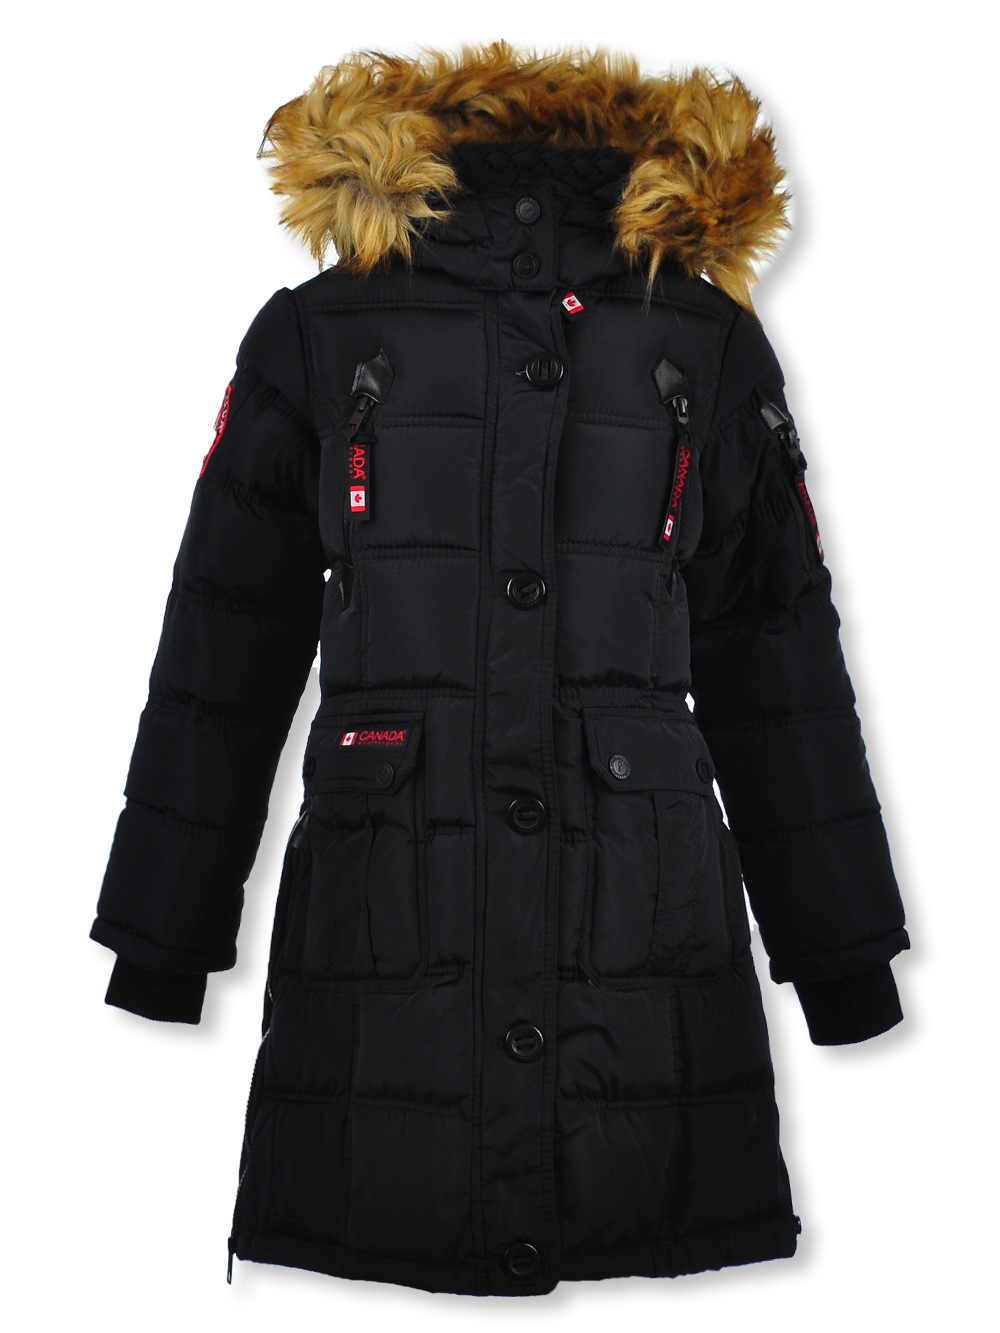 Canada Weather Gear Girls' Faux-Fur Long Parka - black/natural, 2t (Toddler) - image 1 of 3